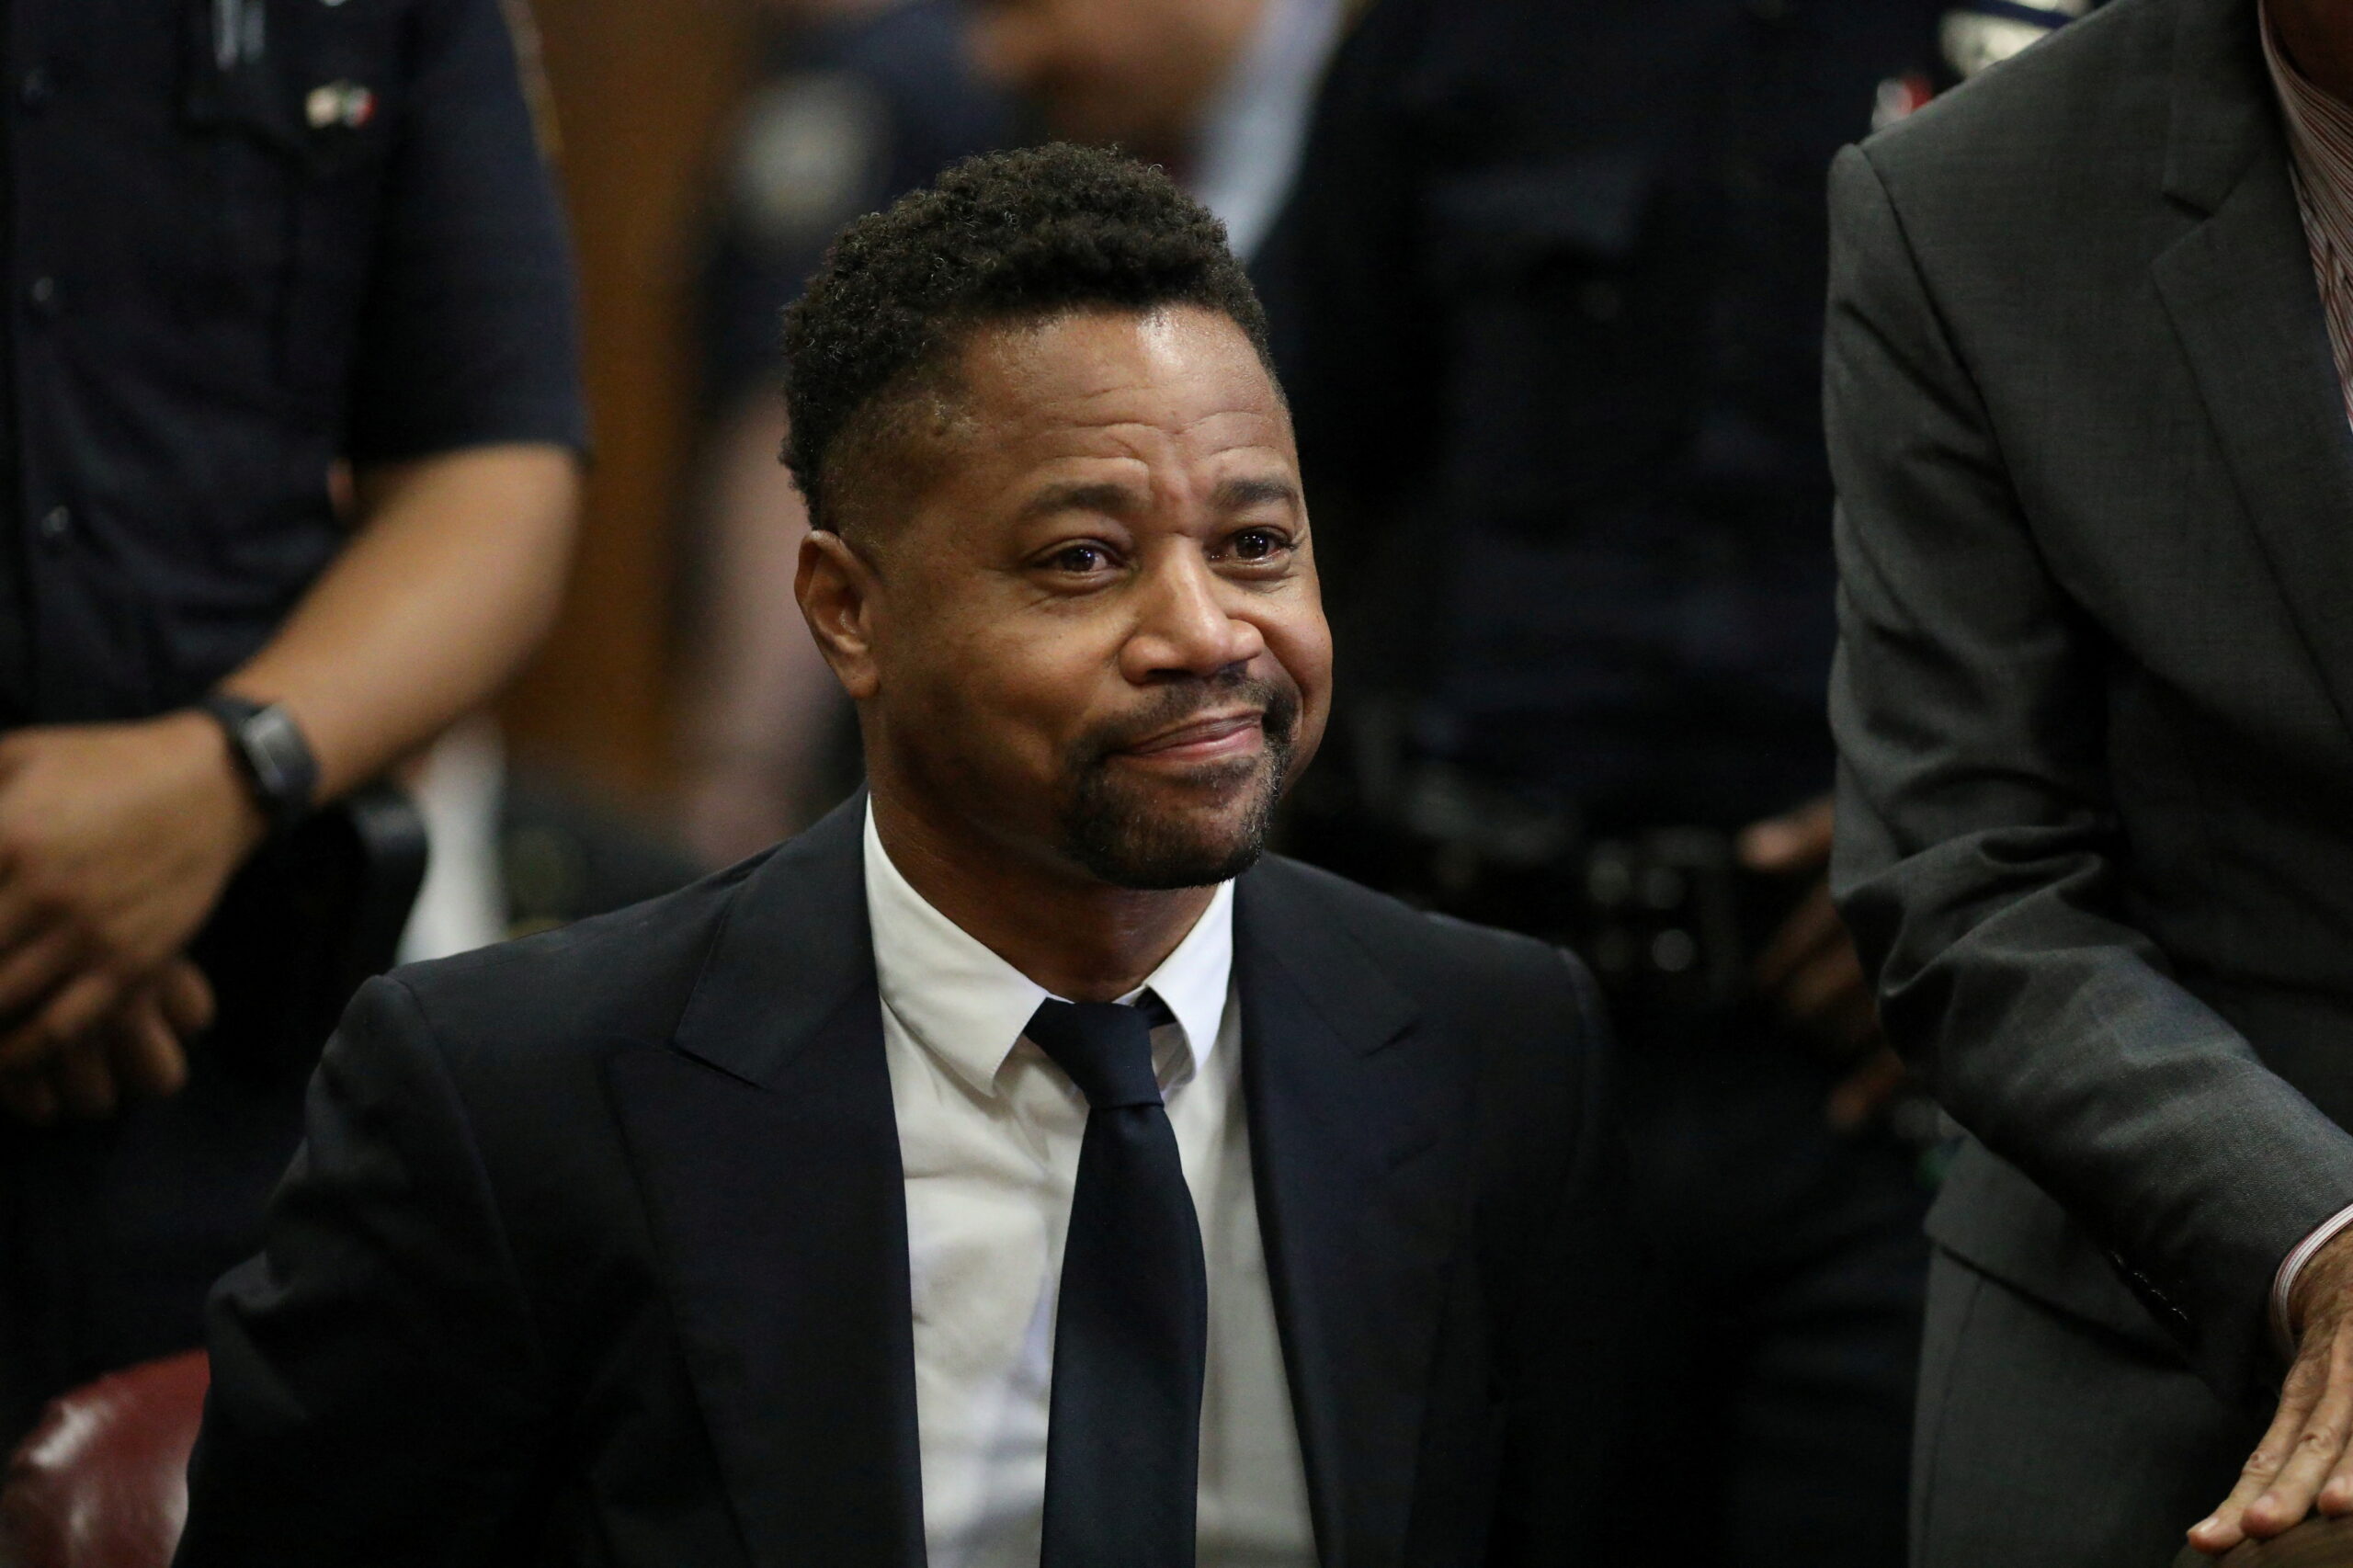 FILE PHOTO: Actor Cuba Gooding Jr. appears for his arraignment in New York State Supreme Court in the Manhattan borough of...